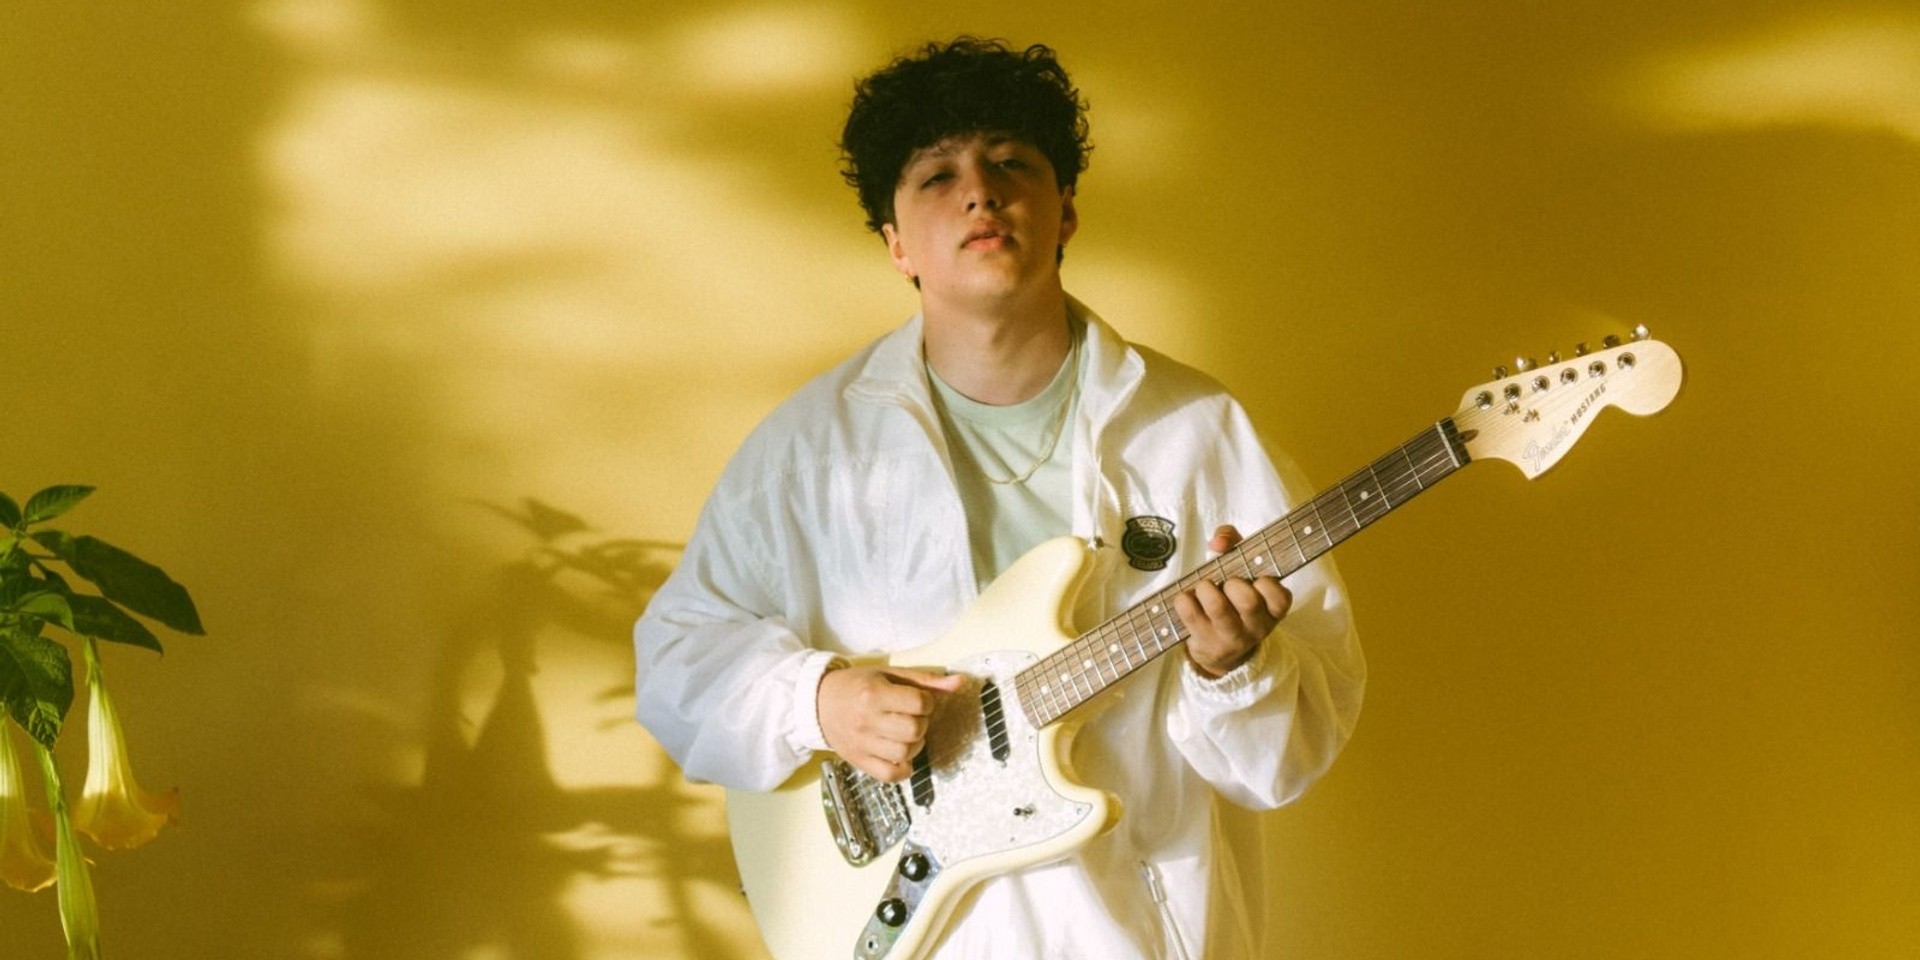 Boy Pablo cancels upcoming Asia tour due to health reasons: "I hope you can understand that this is what’s best for me in the long run."